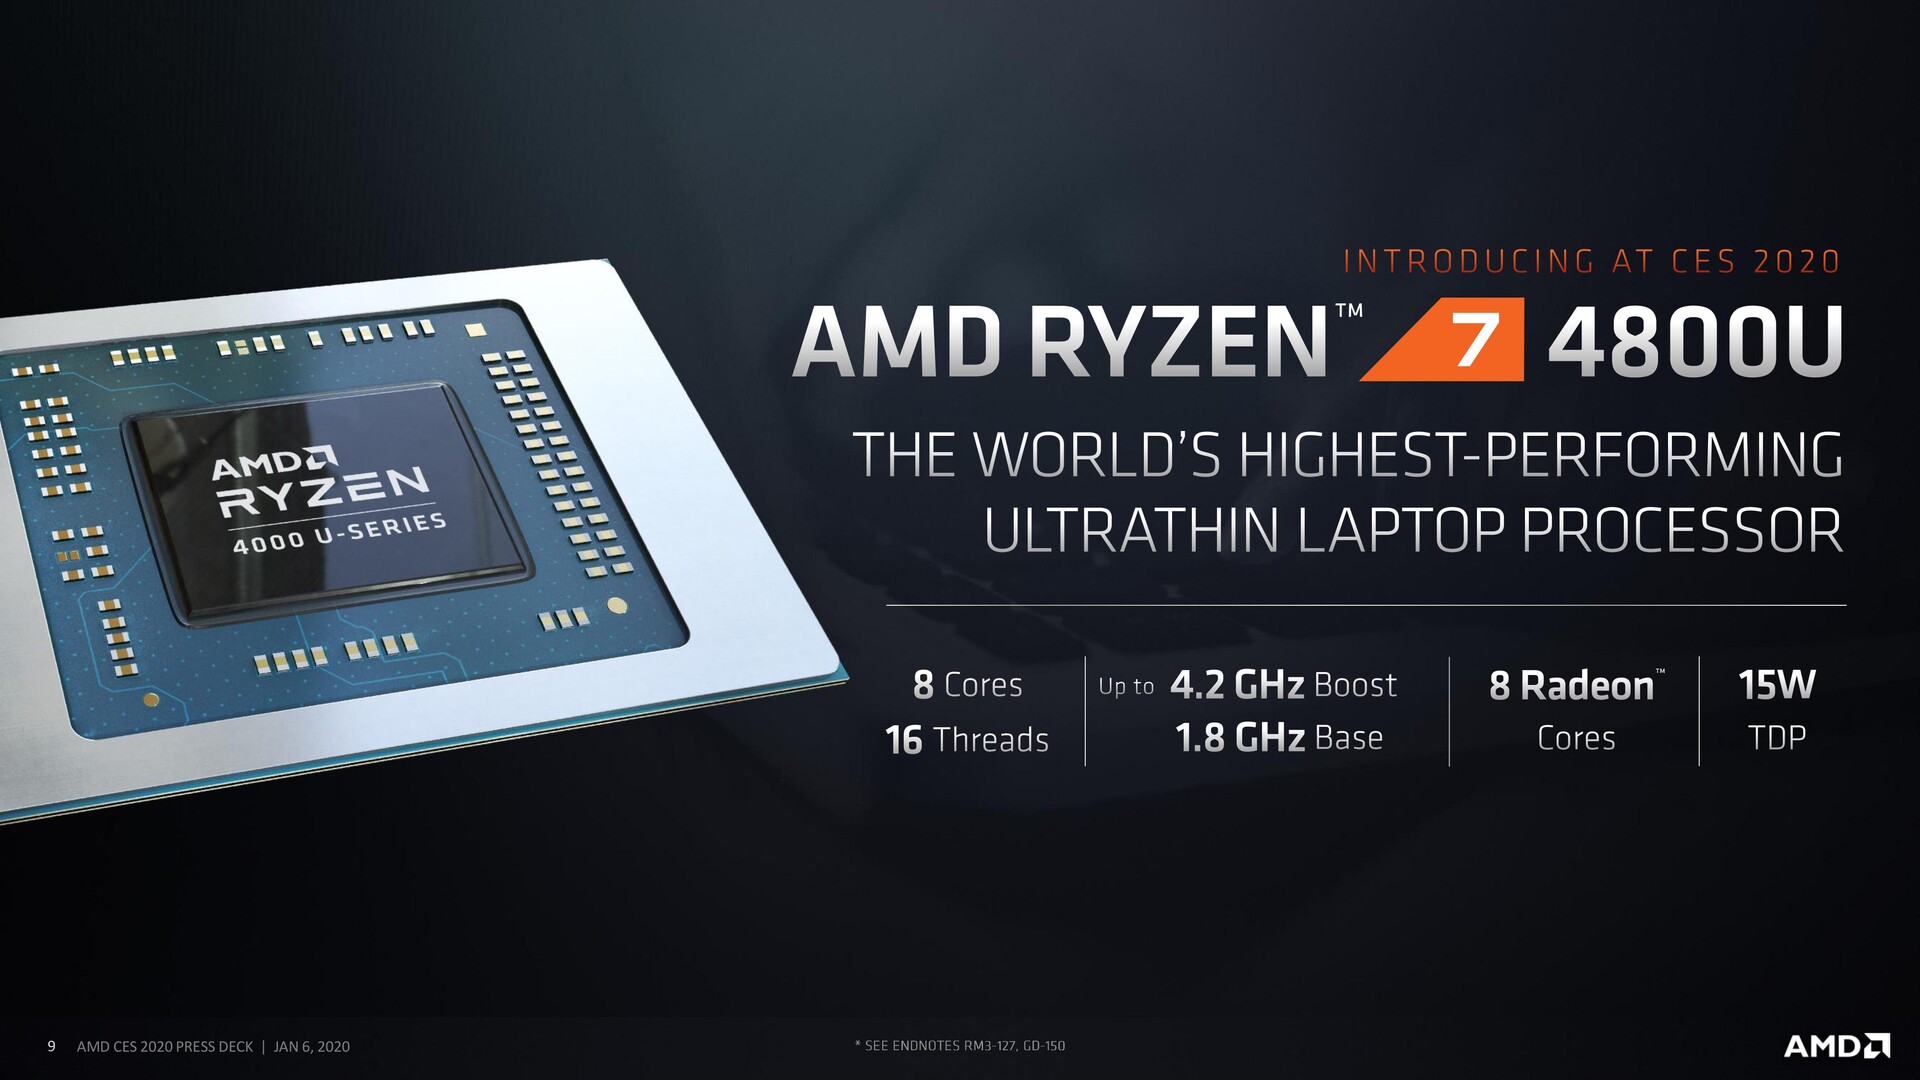 Updated Amd Ryzen Mobile 4000 U And H Series Apus Bring 7nm 8c 16t Goodness To Laptops First Benchmarks Show Amd Clobbering Intel Core I7 1065g7 And Core I7 9750h For Big Gains Notebookcheck Net News